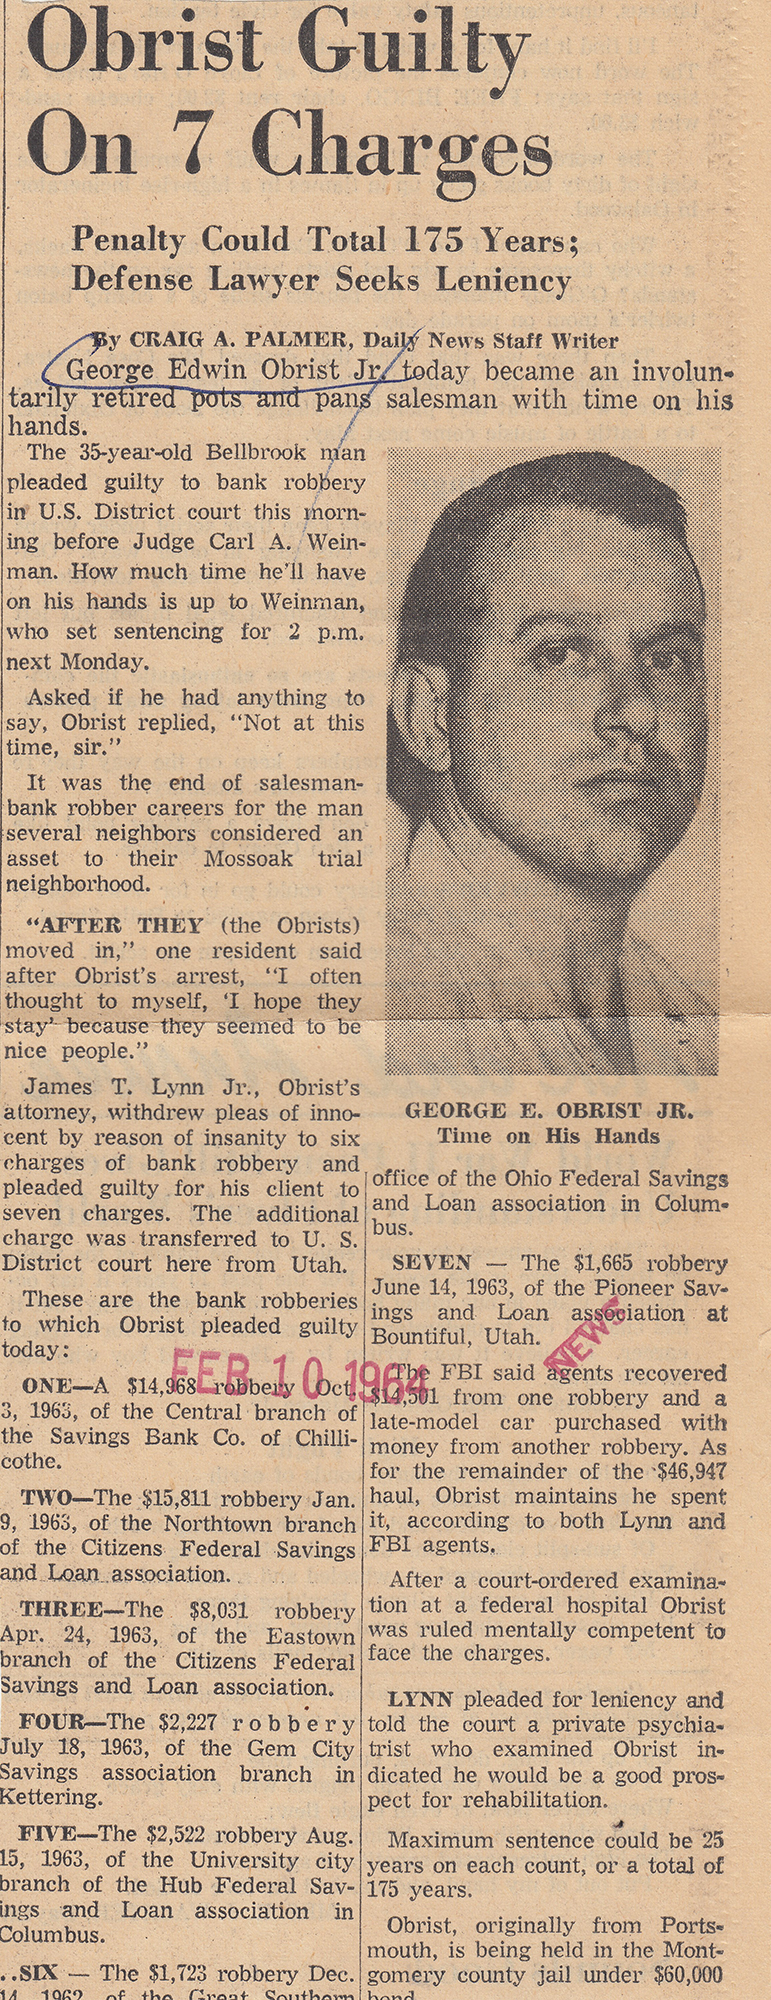 Obrist Guilty on 7 Charges, Dayton Daily News, 10 Feb 1964